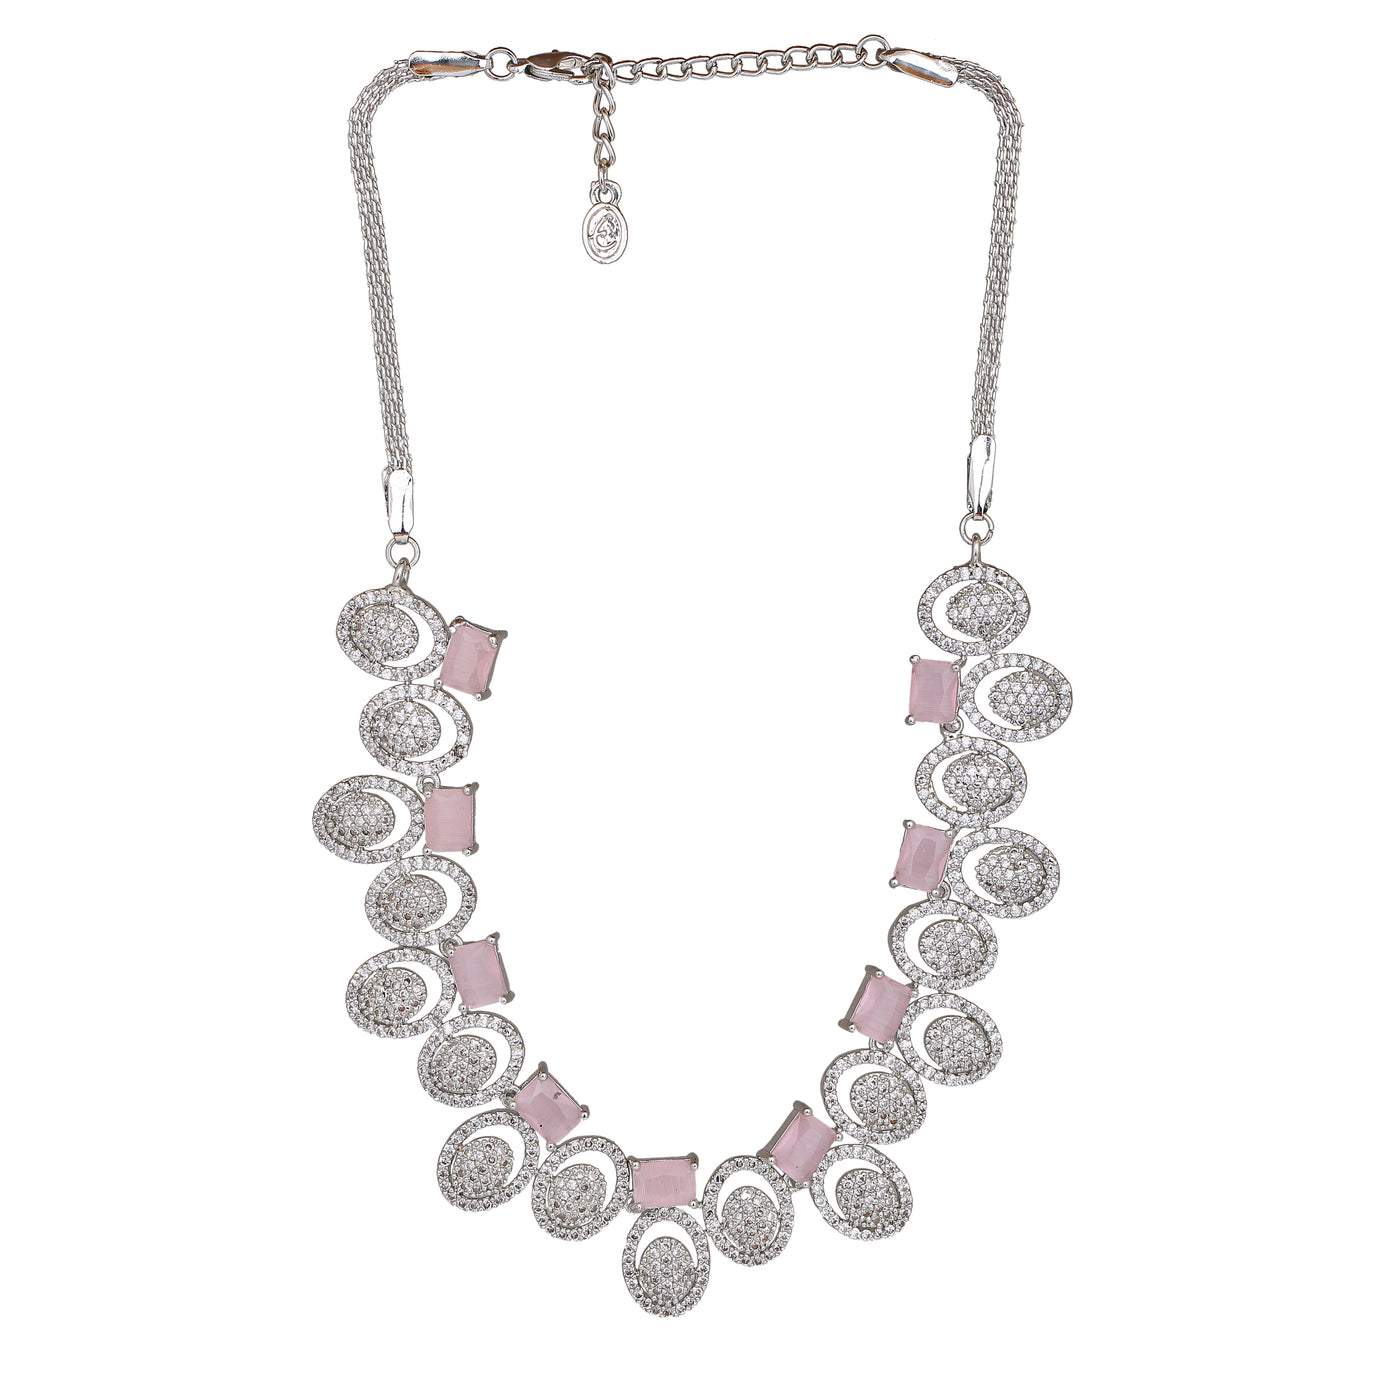 Estele Rhodium Plated CZ Elegant Necklace Set with Mint Pink Crystals for Women